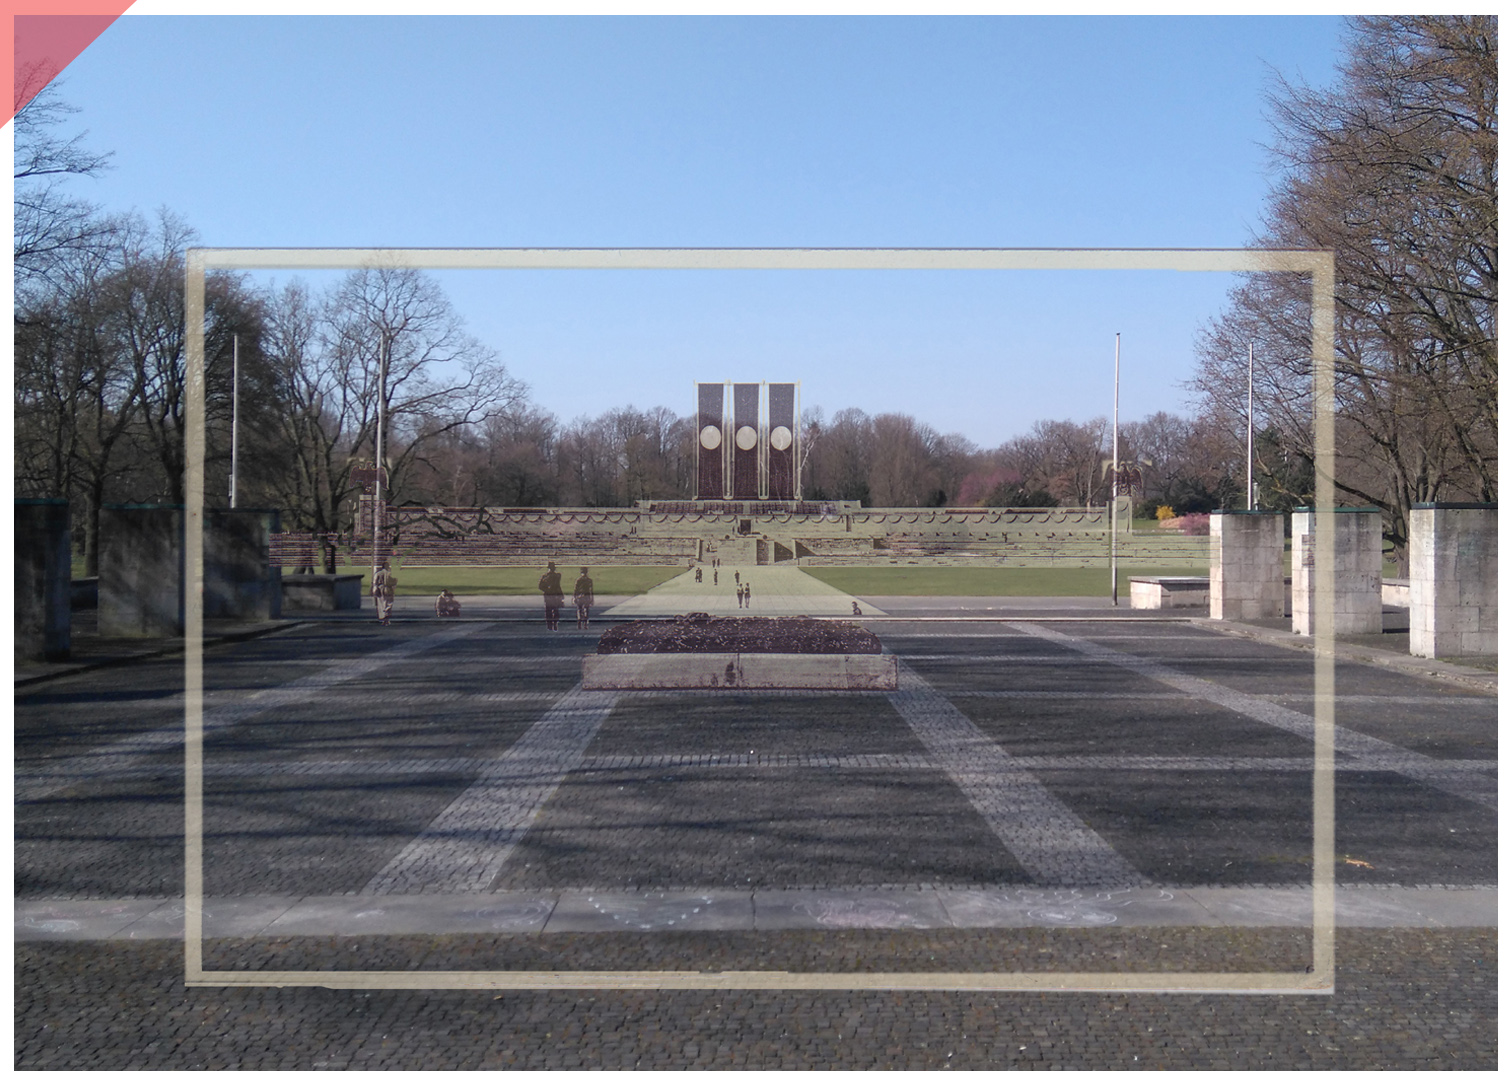 Luitpold-arena-Nuremberg-Nazi-Party-Rally-Grounds-Hall-of-honor-Then-Now